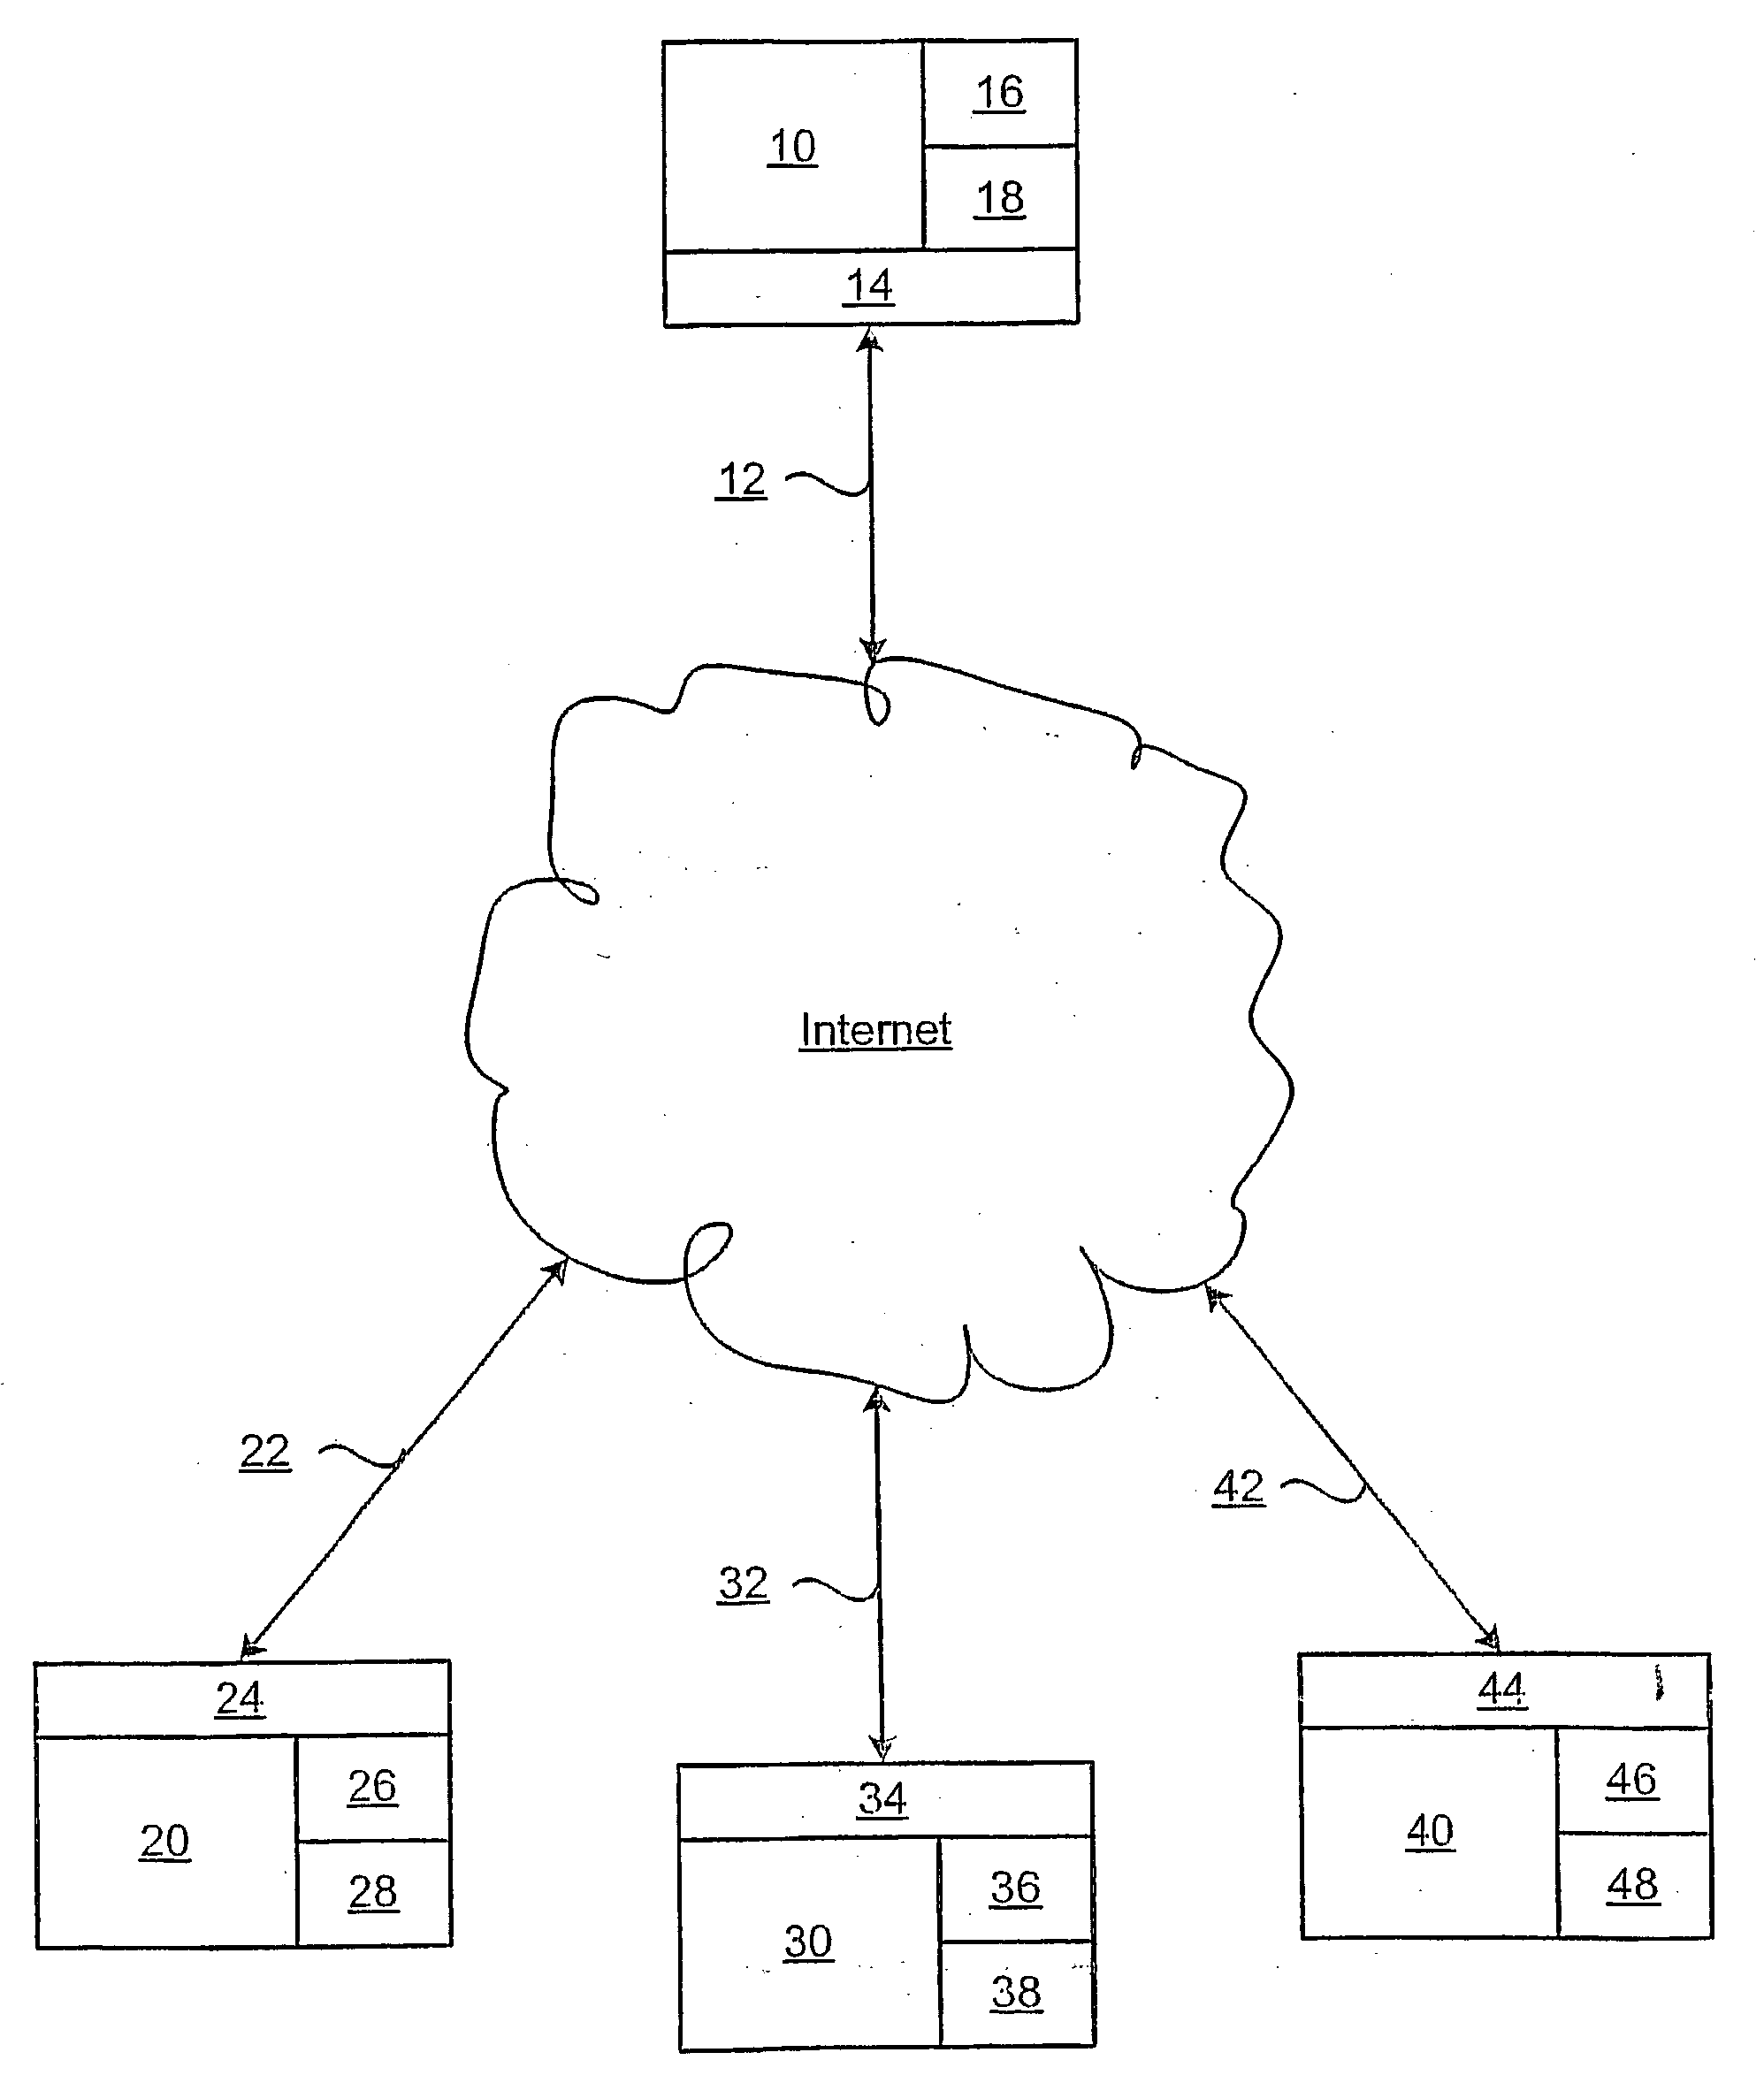 Apparatus and method for conveying private information within a group communication system